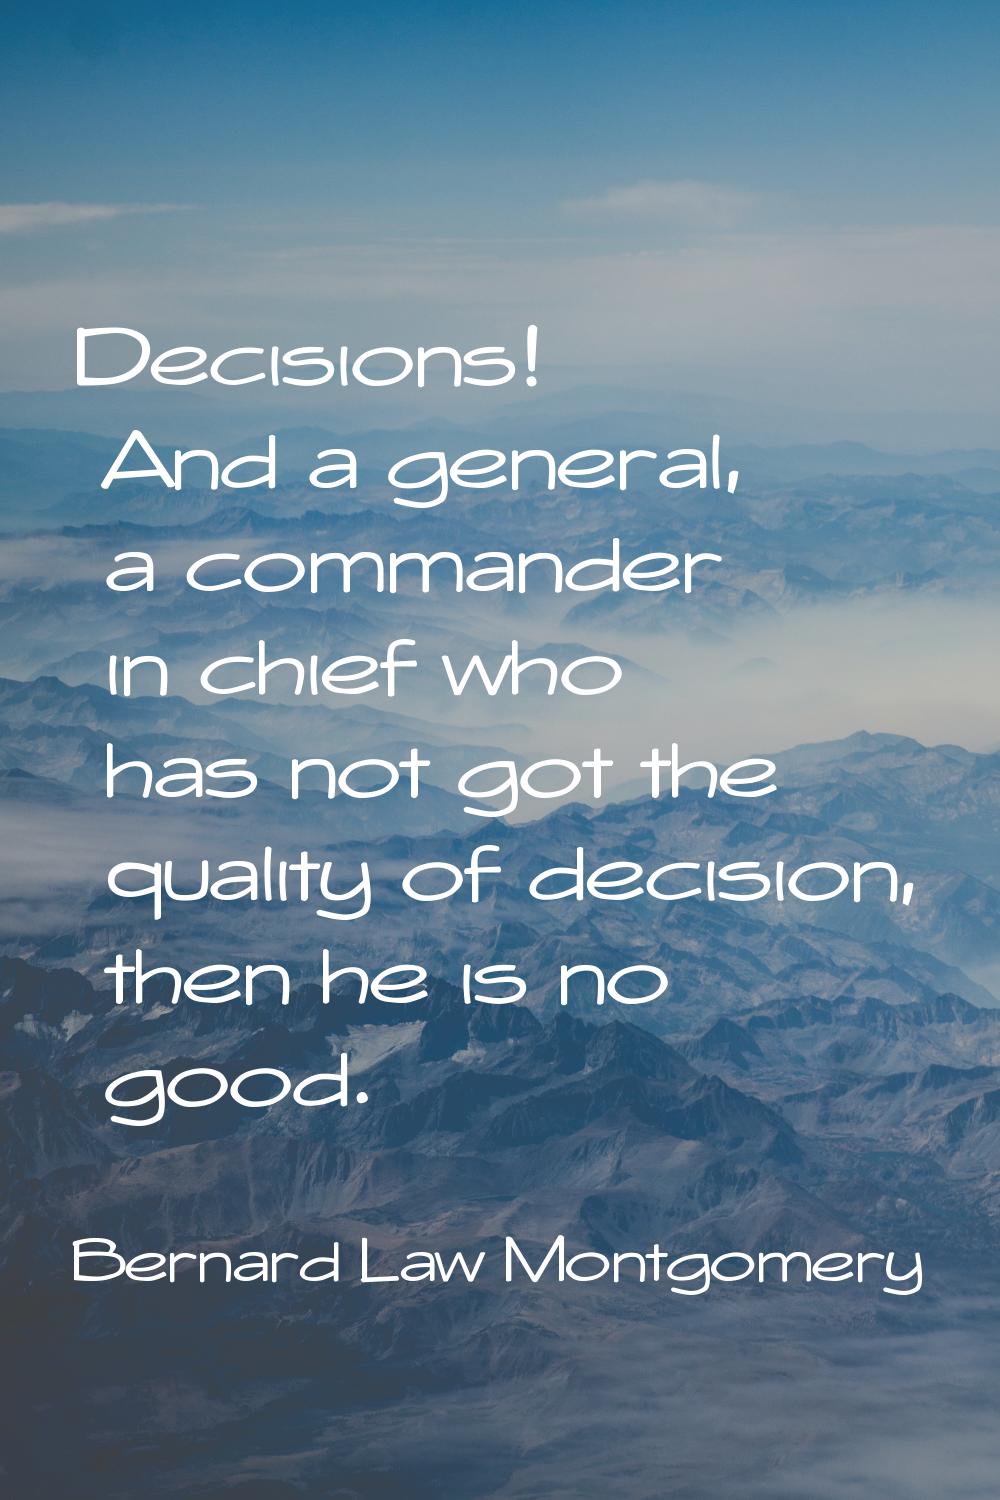 Decisions! And a general, a commander in chief who has not got the quality of decision, then he is 